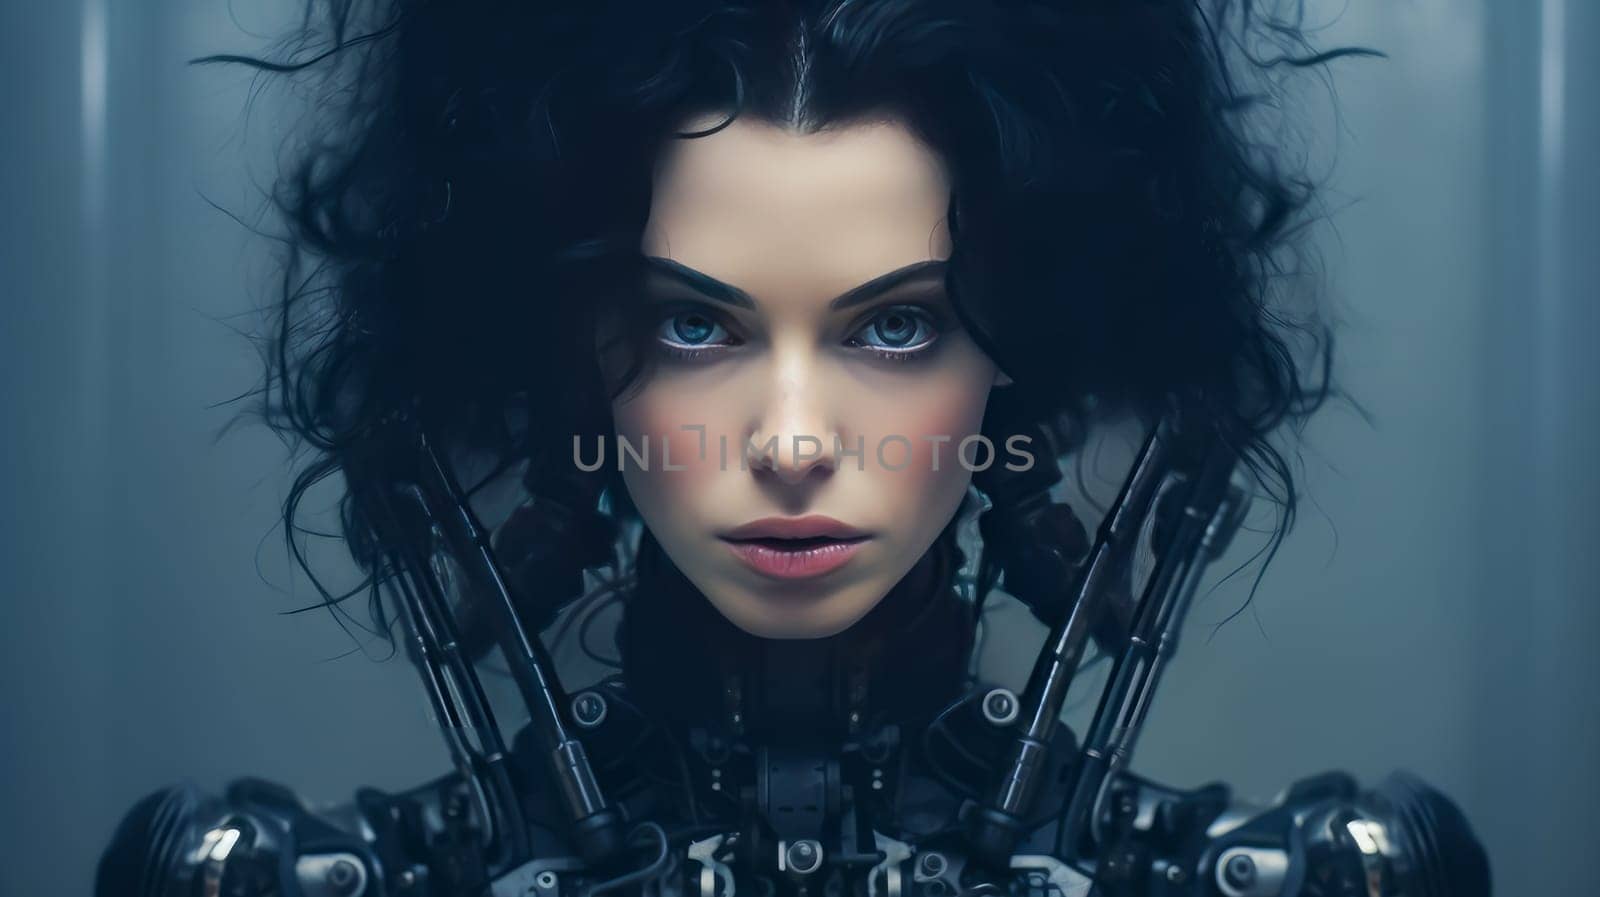 Robot cyborg woman girl with black hair on a dark background with artificial intelligence, future technologies. Internet and digital technologies. Global network. Integrating technology and human interaction. Chat bot. Digital technologies of future